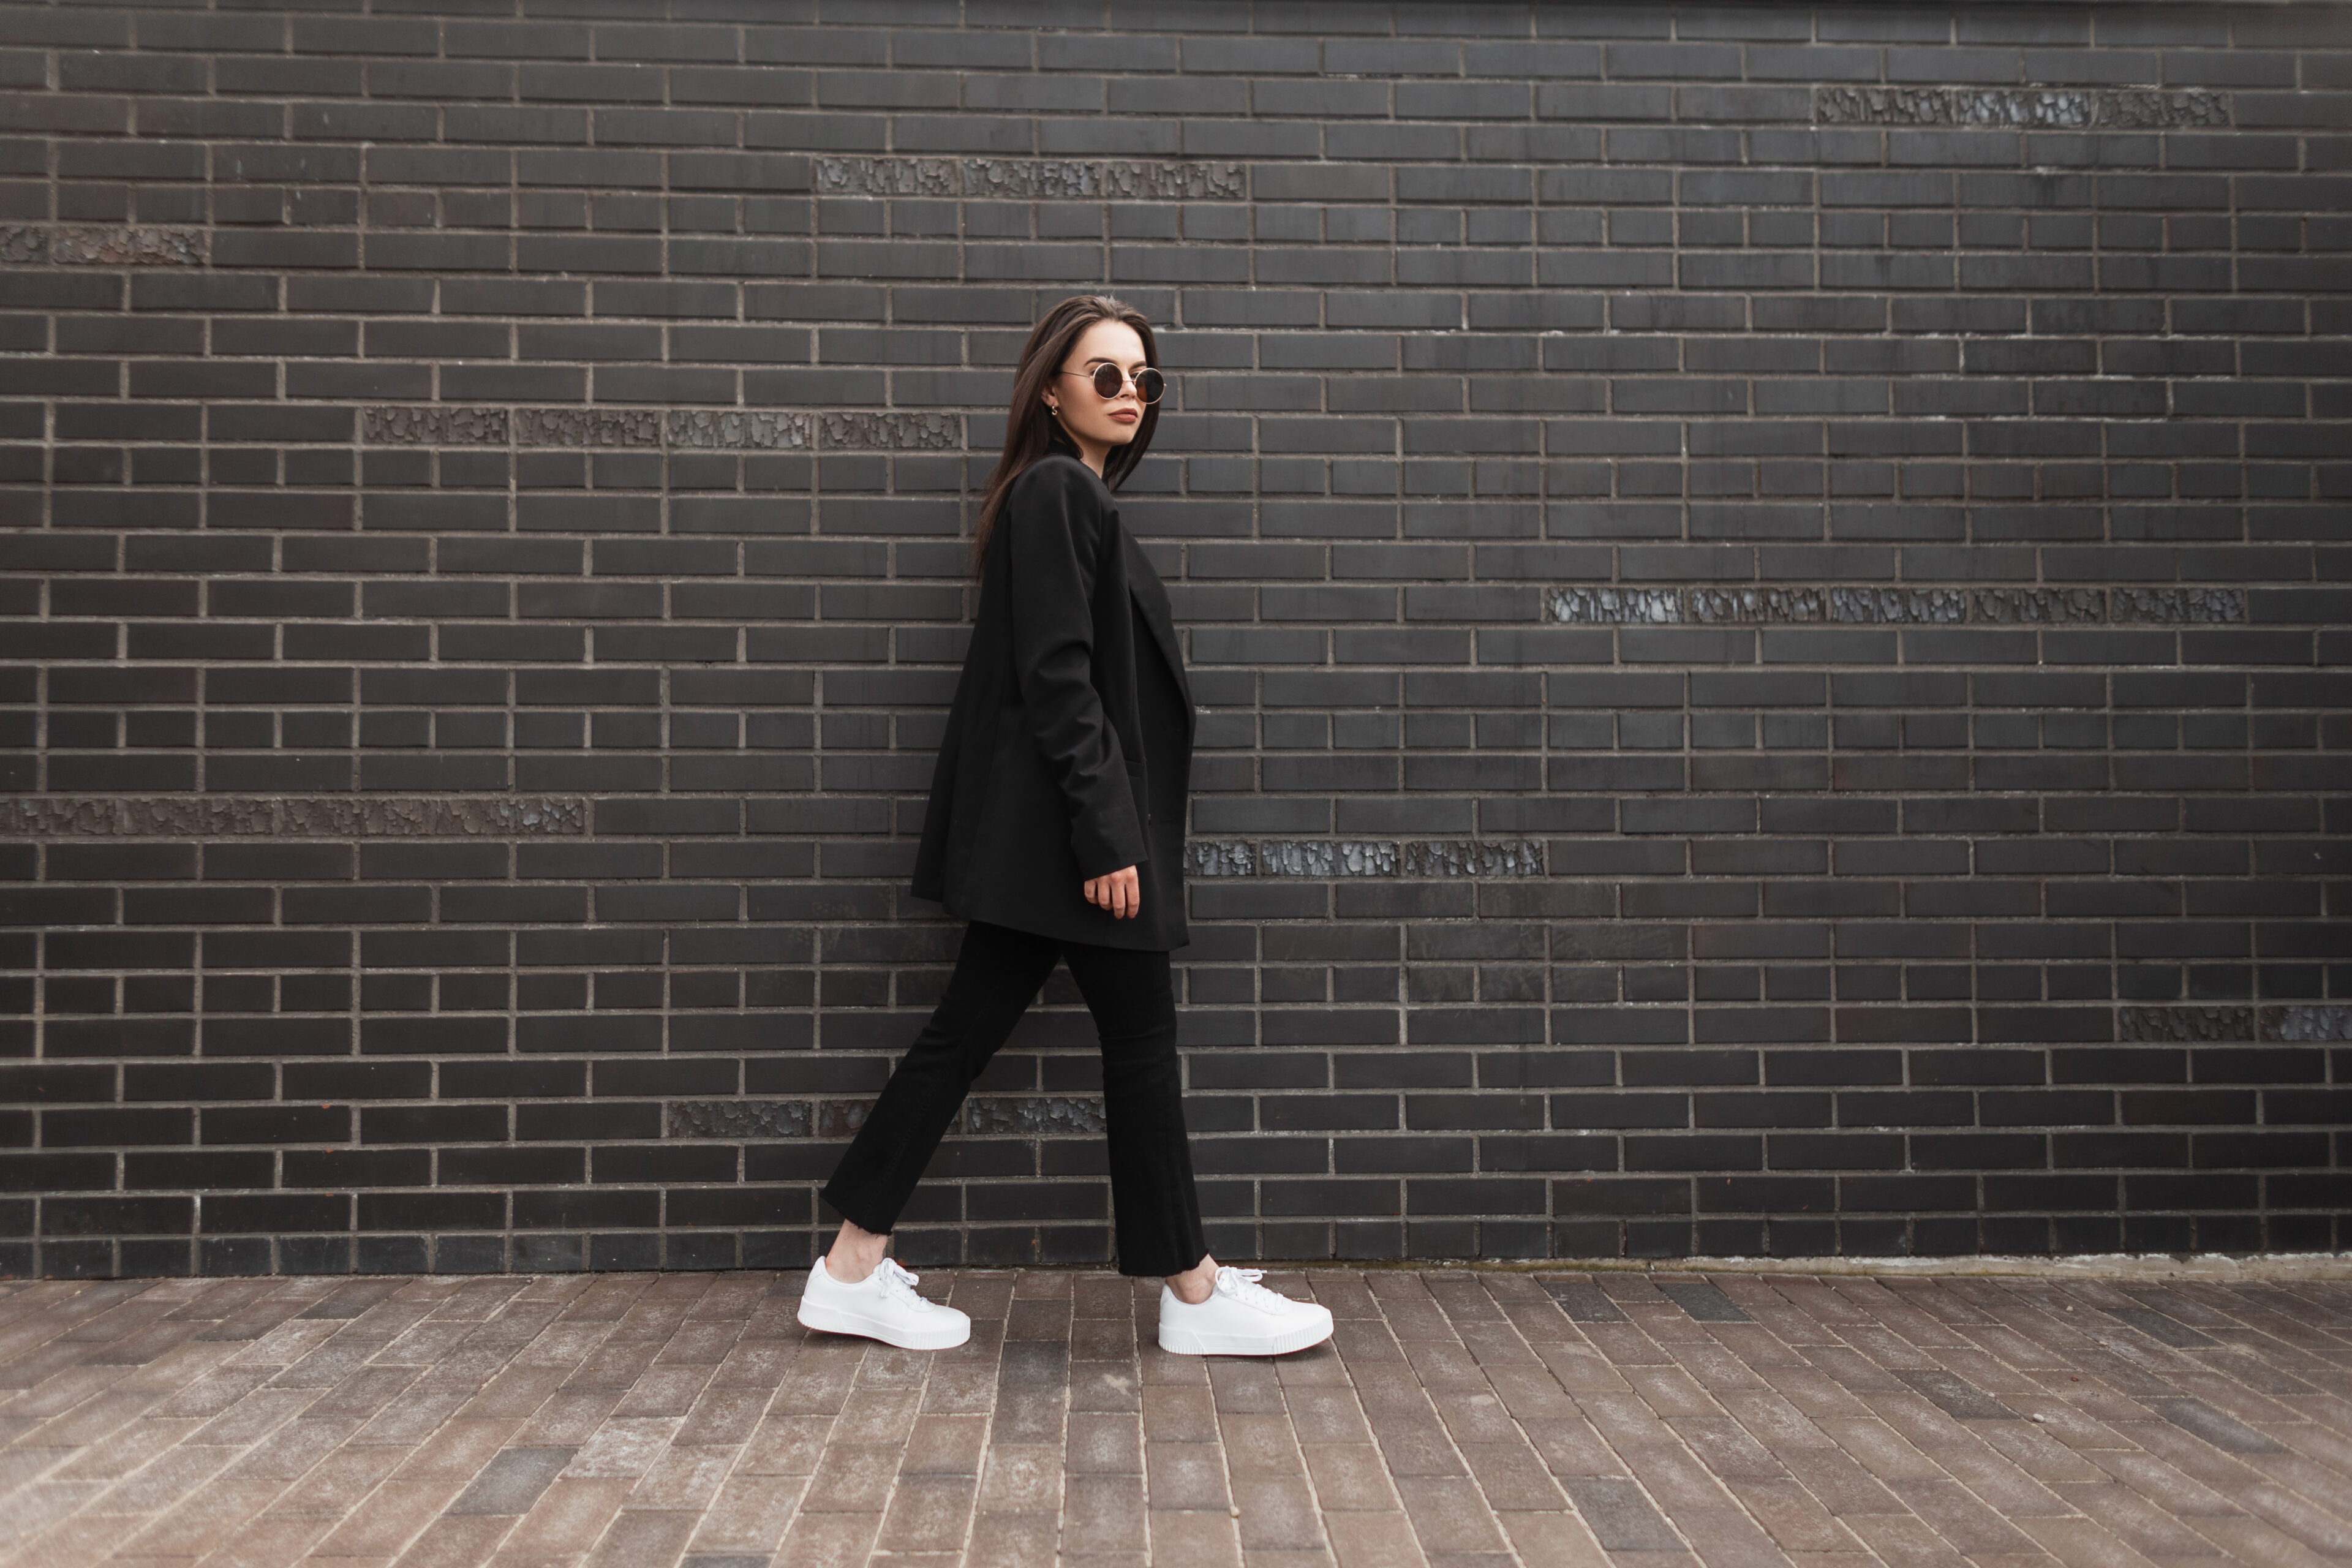 Black Stylish Jacket In Vintage Jeans In White Sneakers